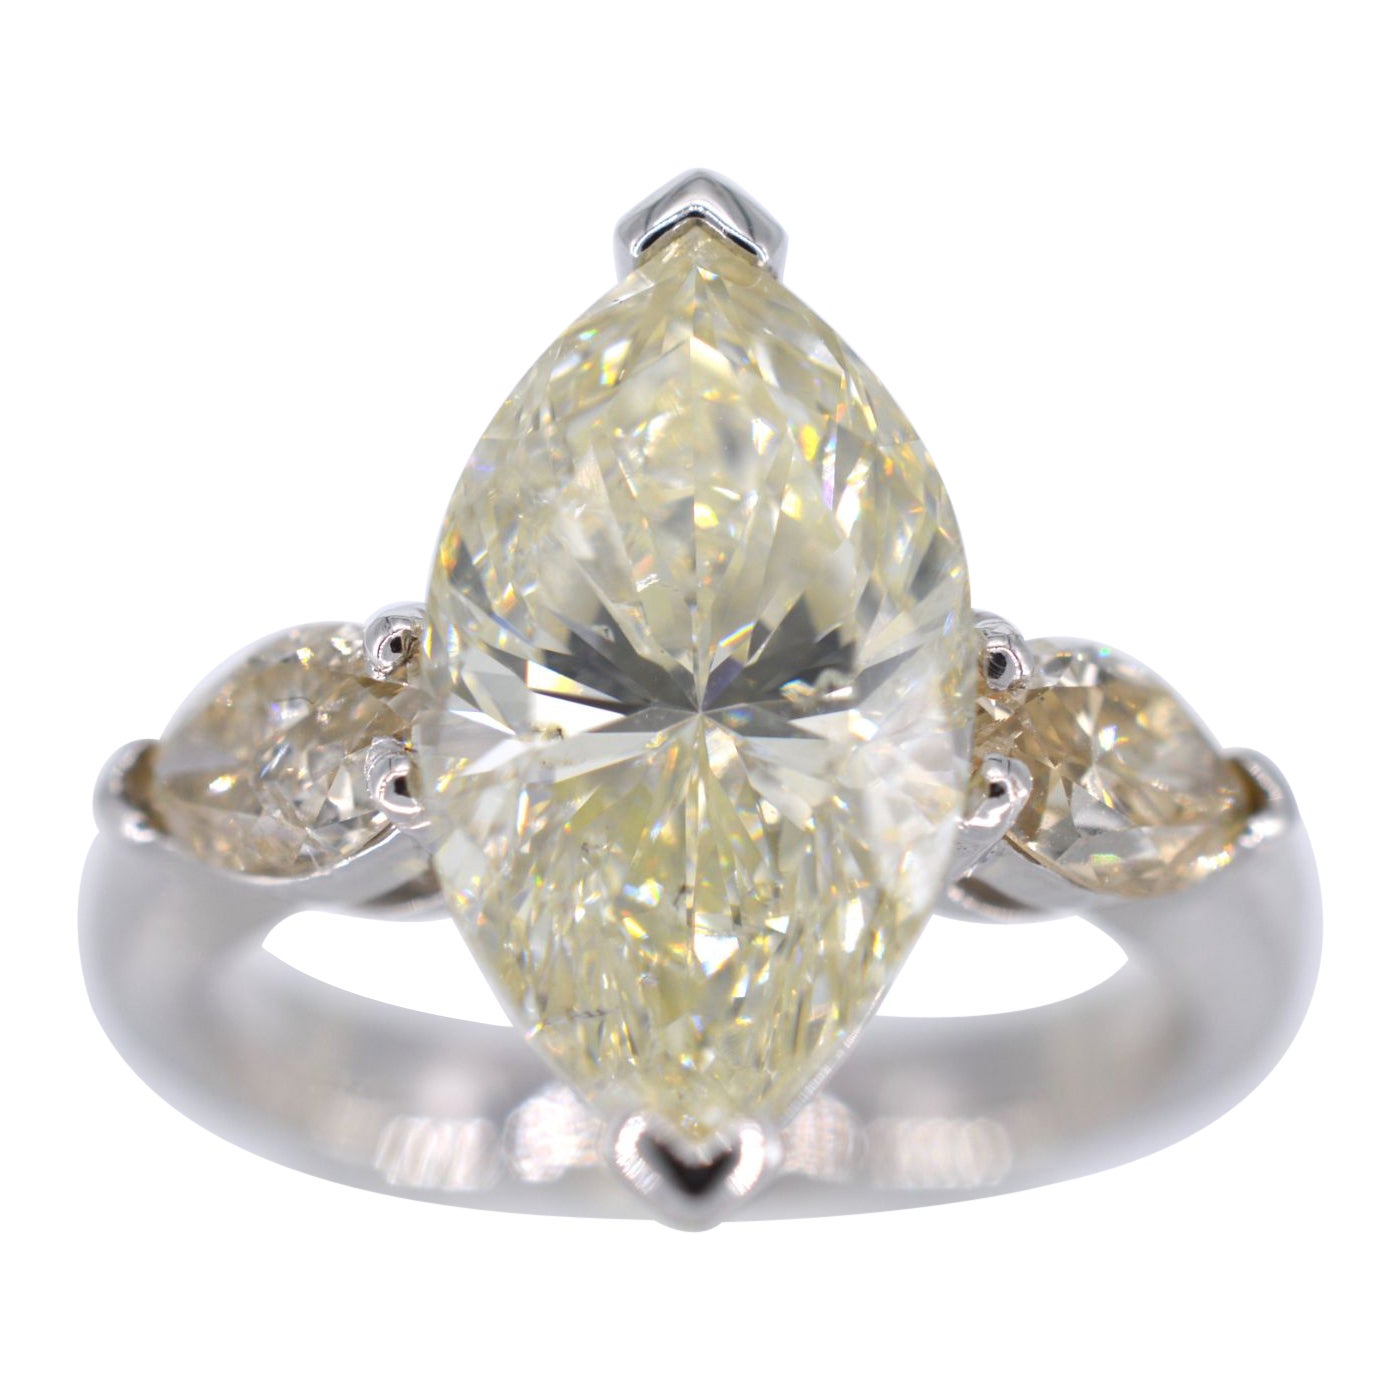 Gold marquise ring with a central diamond of 5.45 carat